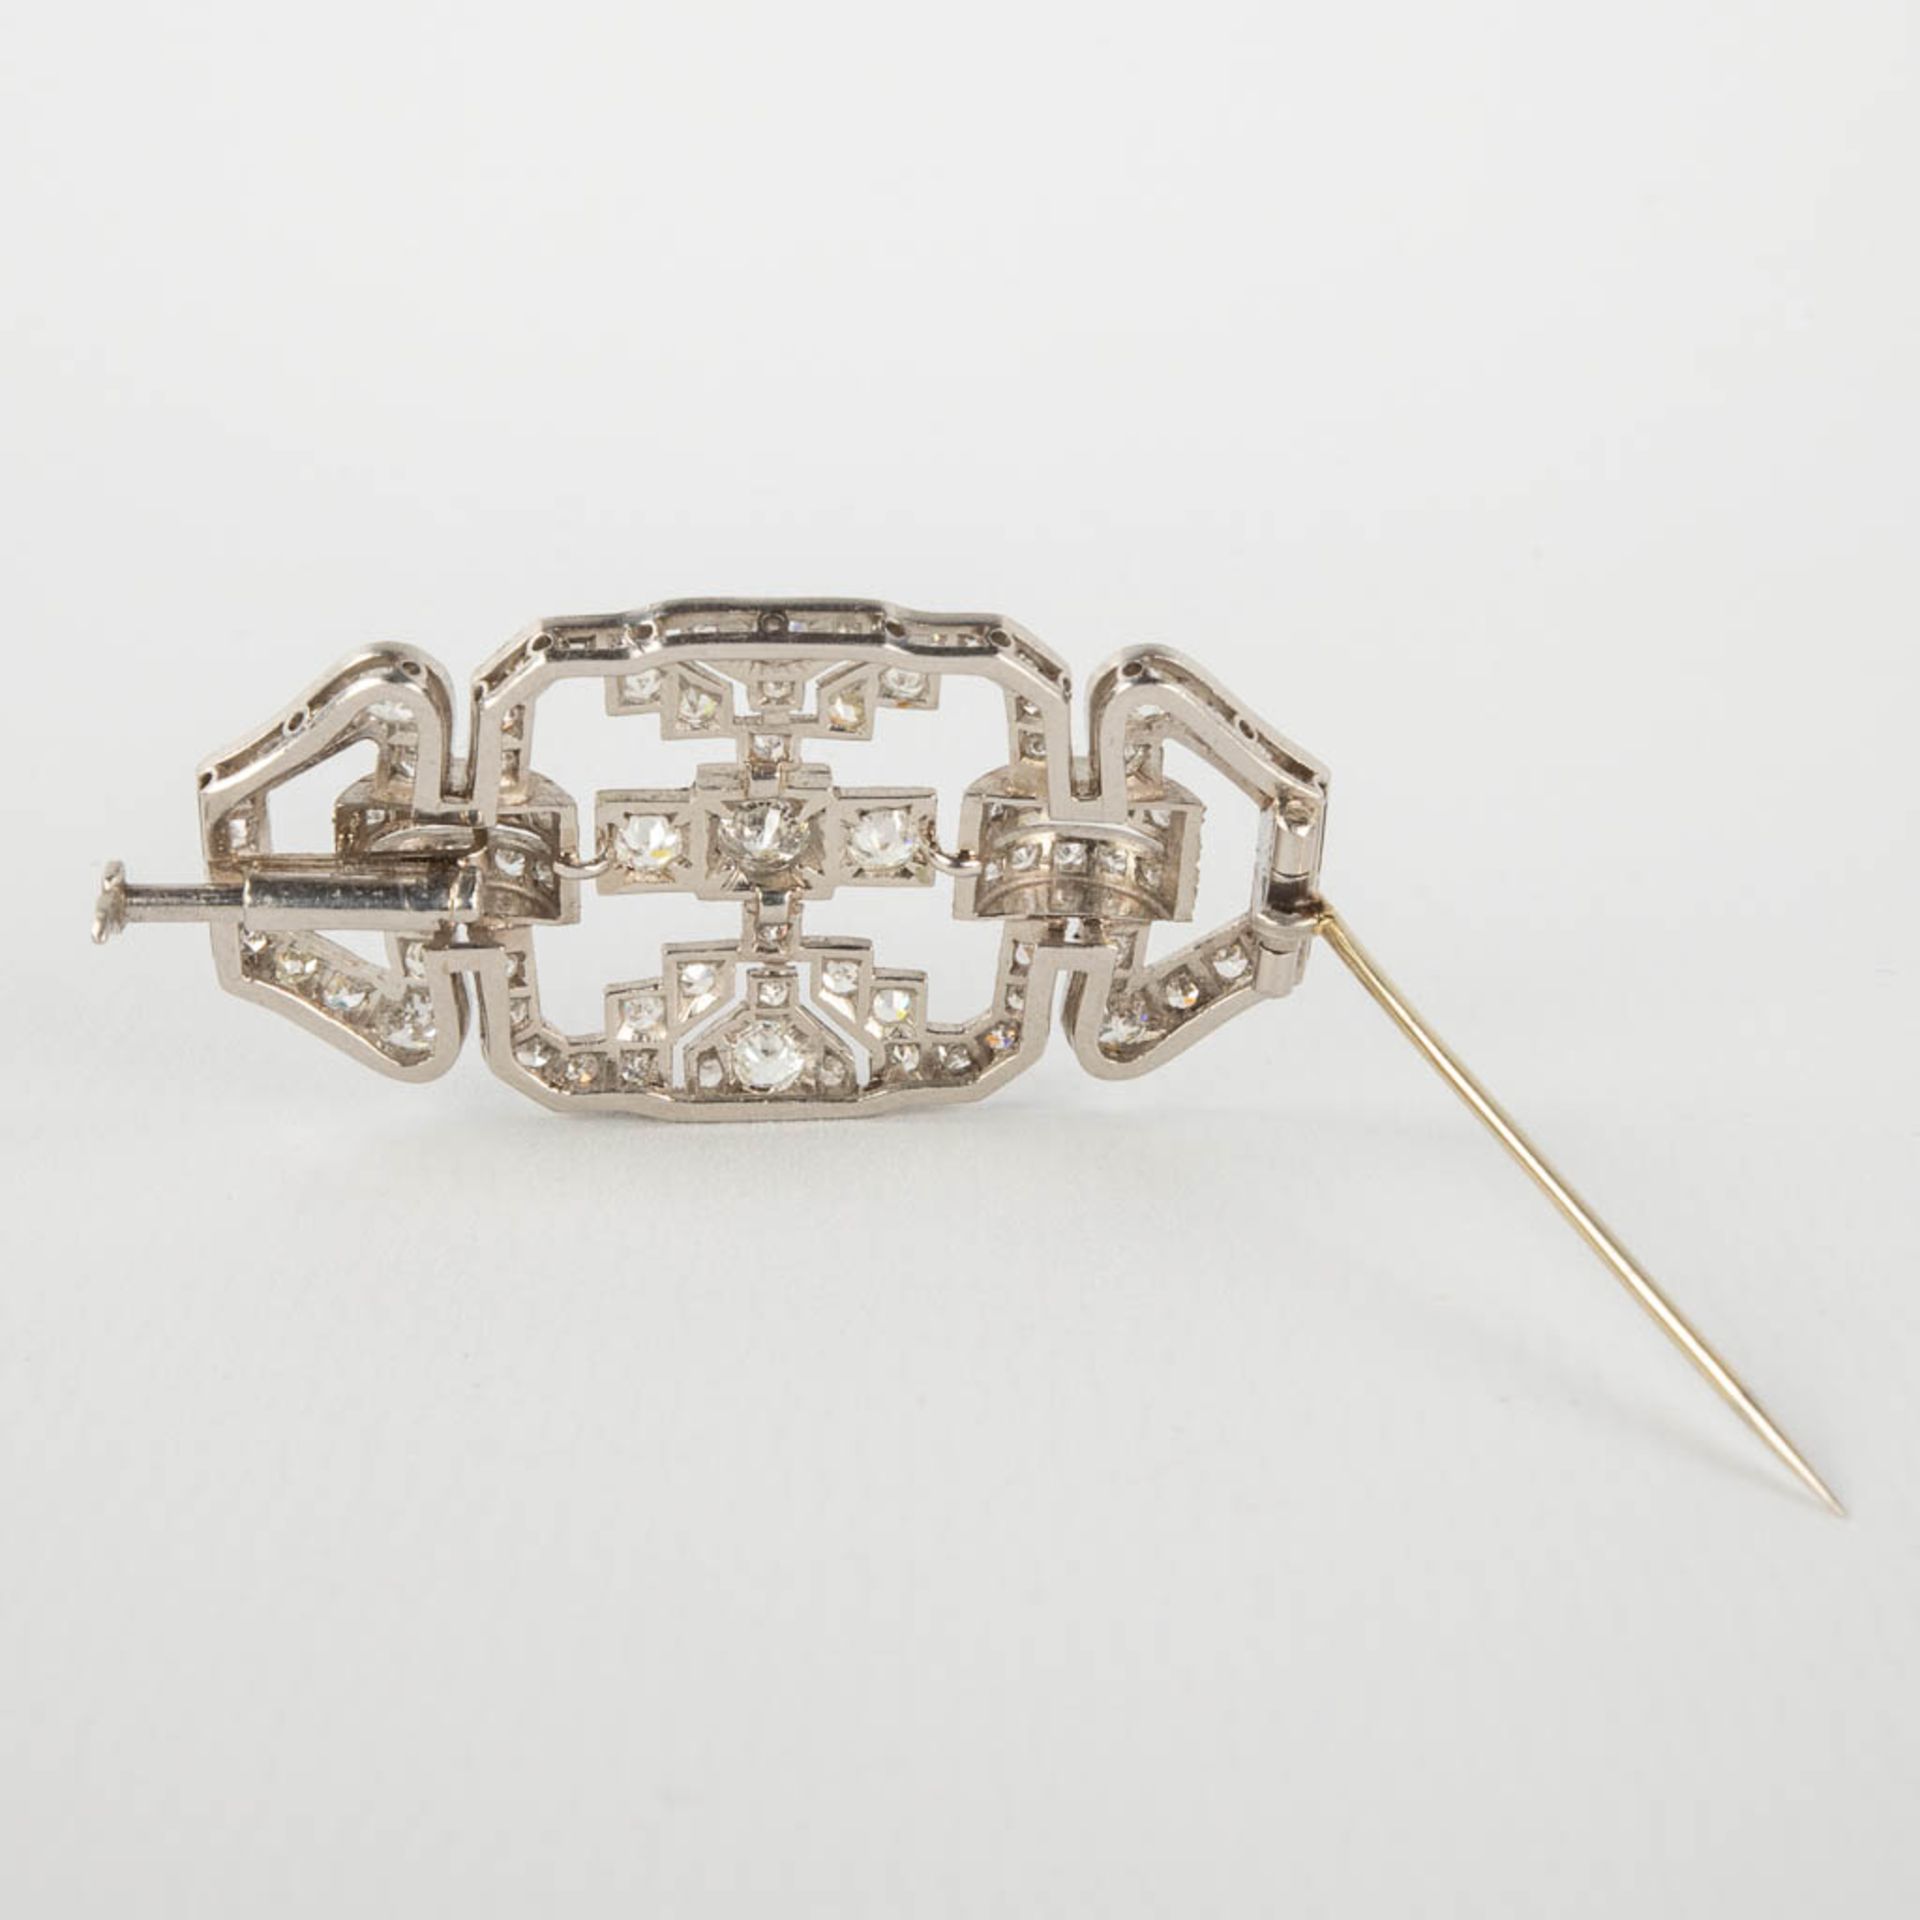 An antique Brooche, art deco style, platinum. Finished with 9 large and smaller brilliants. 13,78g. - Image 10 of 11